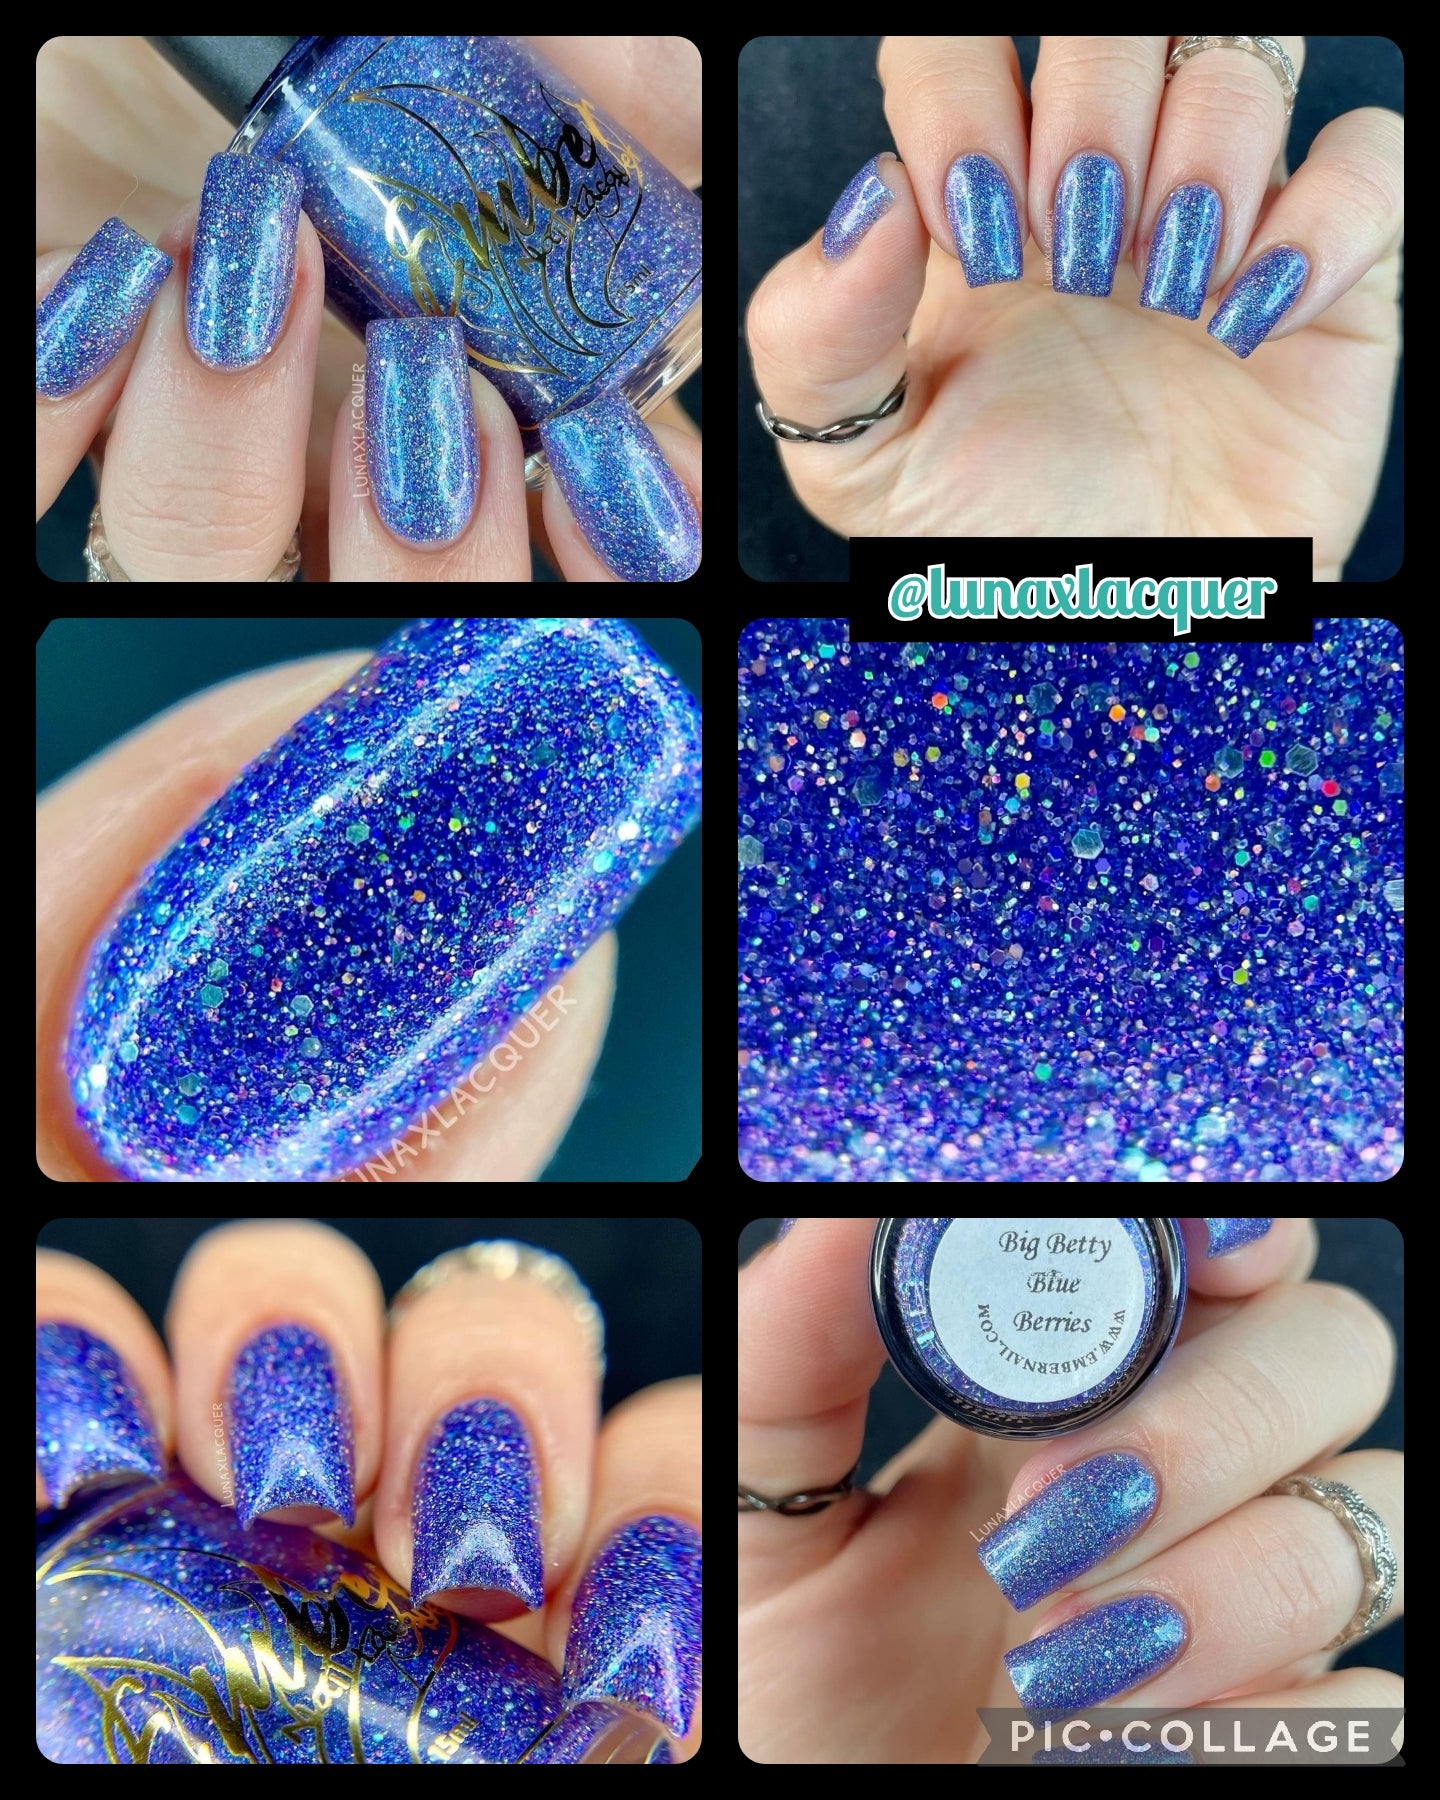 Big Betty Blue Berries collage - top left applied and in the bottle - top right a true blue applied - middle right close view of holographic glitter inside Big Betty Blue Berries - center left Big Betty Blue Berries single nail - bottom left deep blue hue Big Betty - bottom right Big Betty bottle label with purplish hue nails  